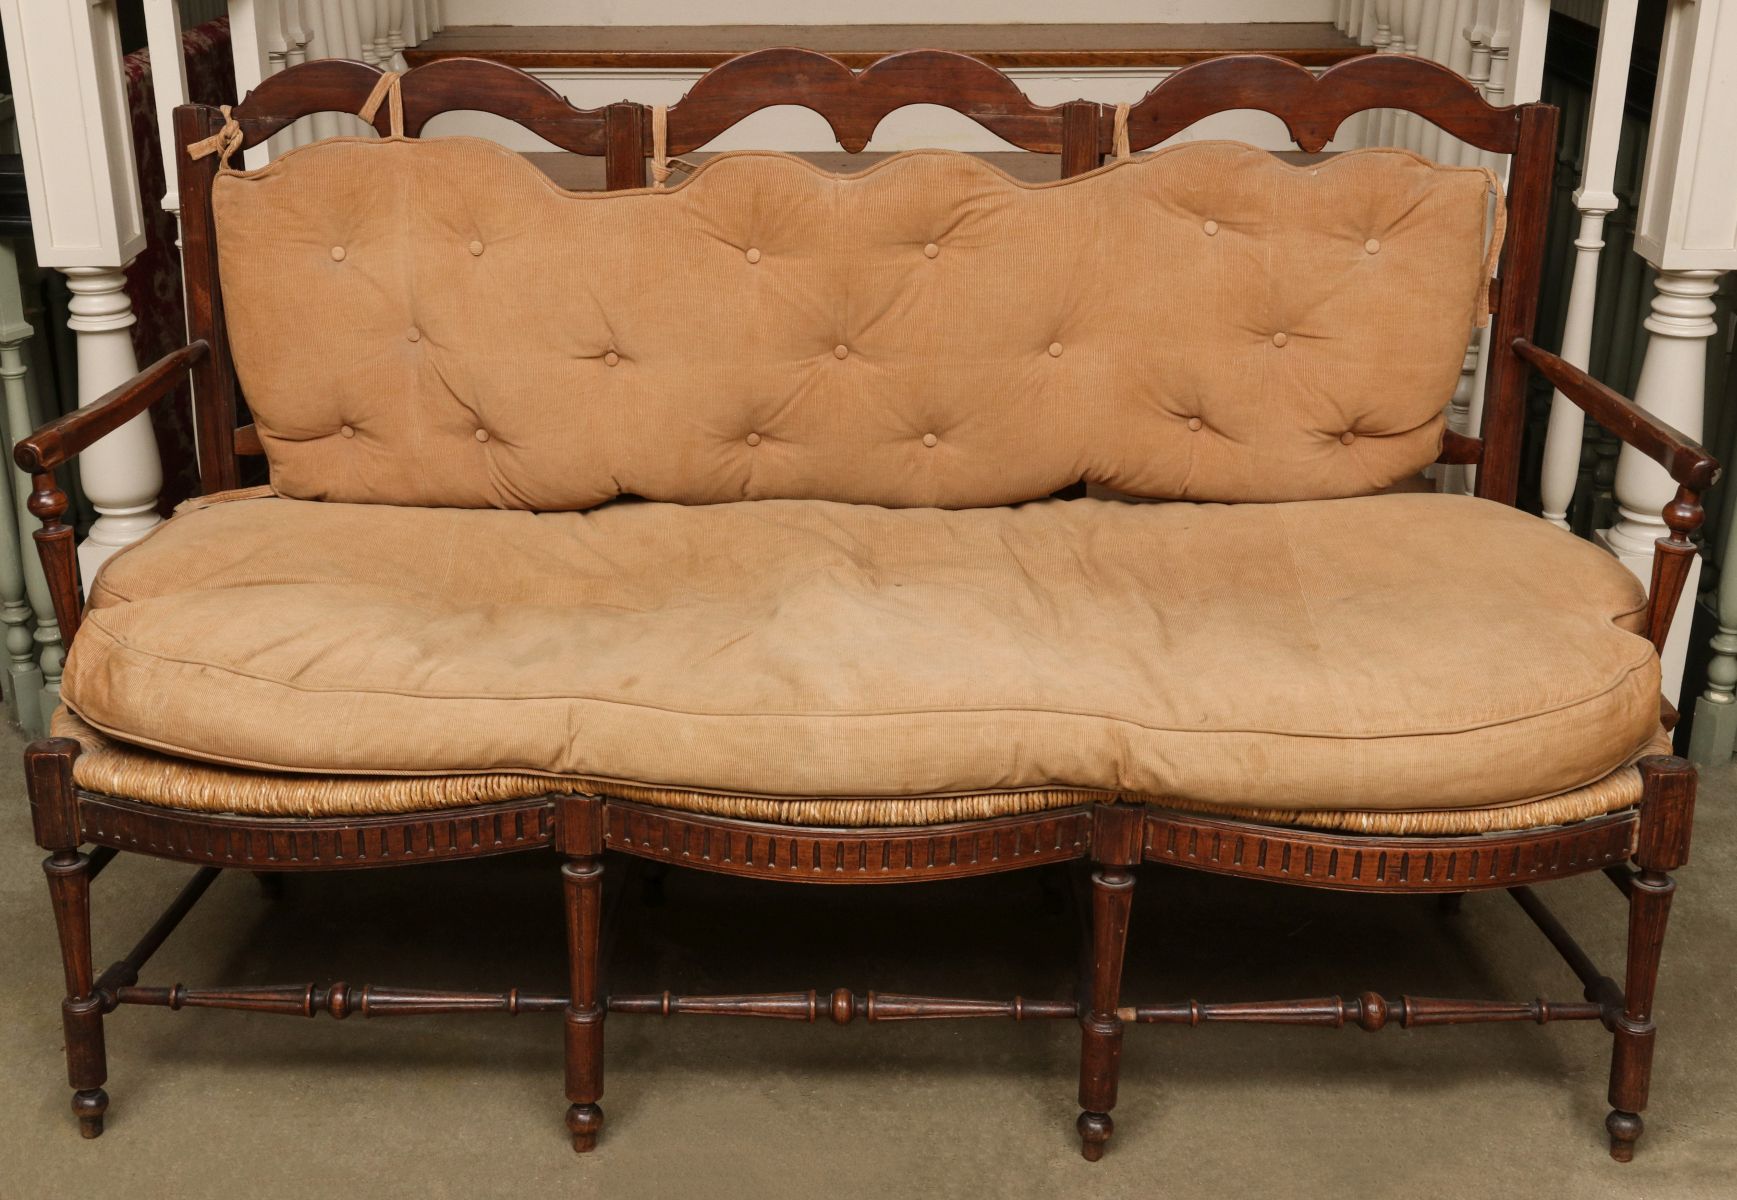 AN 18TH C. FRENCH LADDER BACK RUSH SEAT SOFA